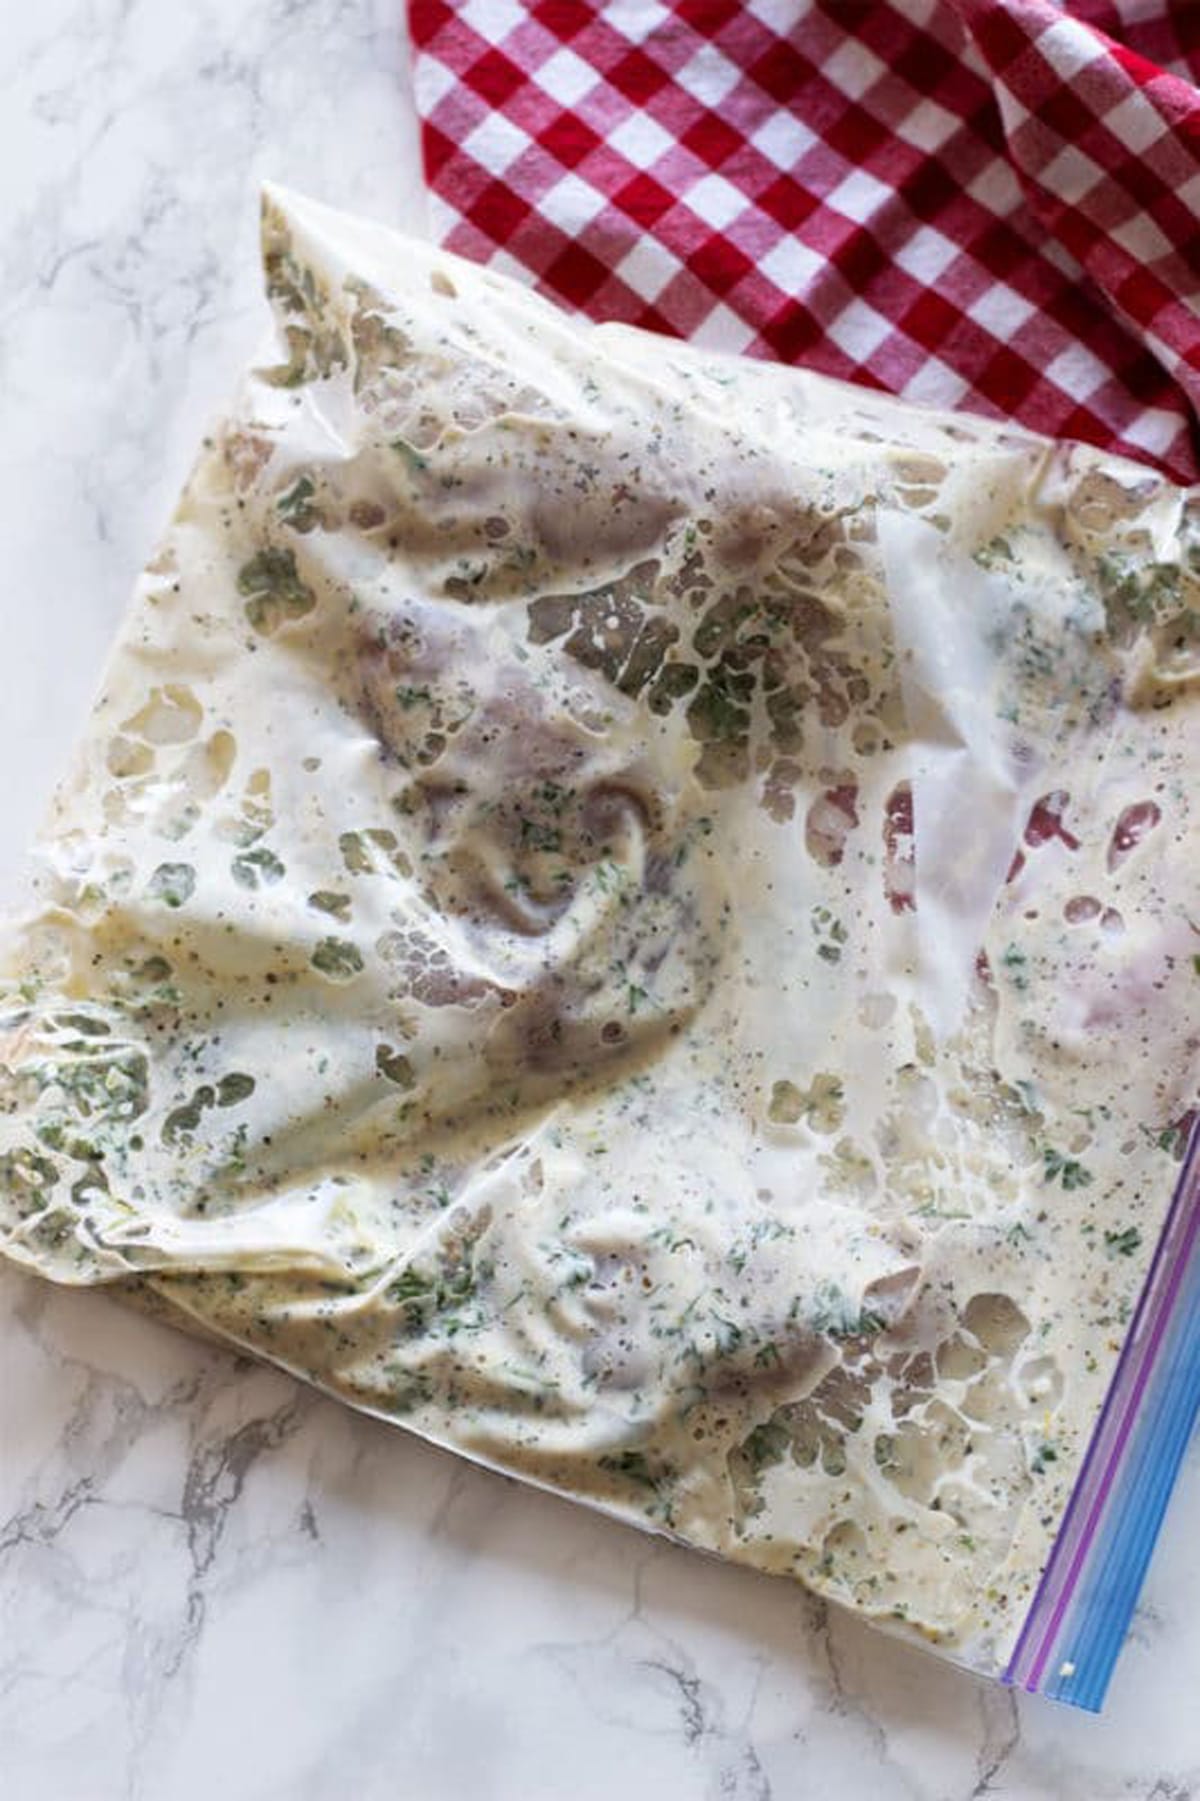 Greek marinated chicken marinating in a Ziplock baggie sitting on a white marble table, red and white gingham napkin on table.